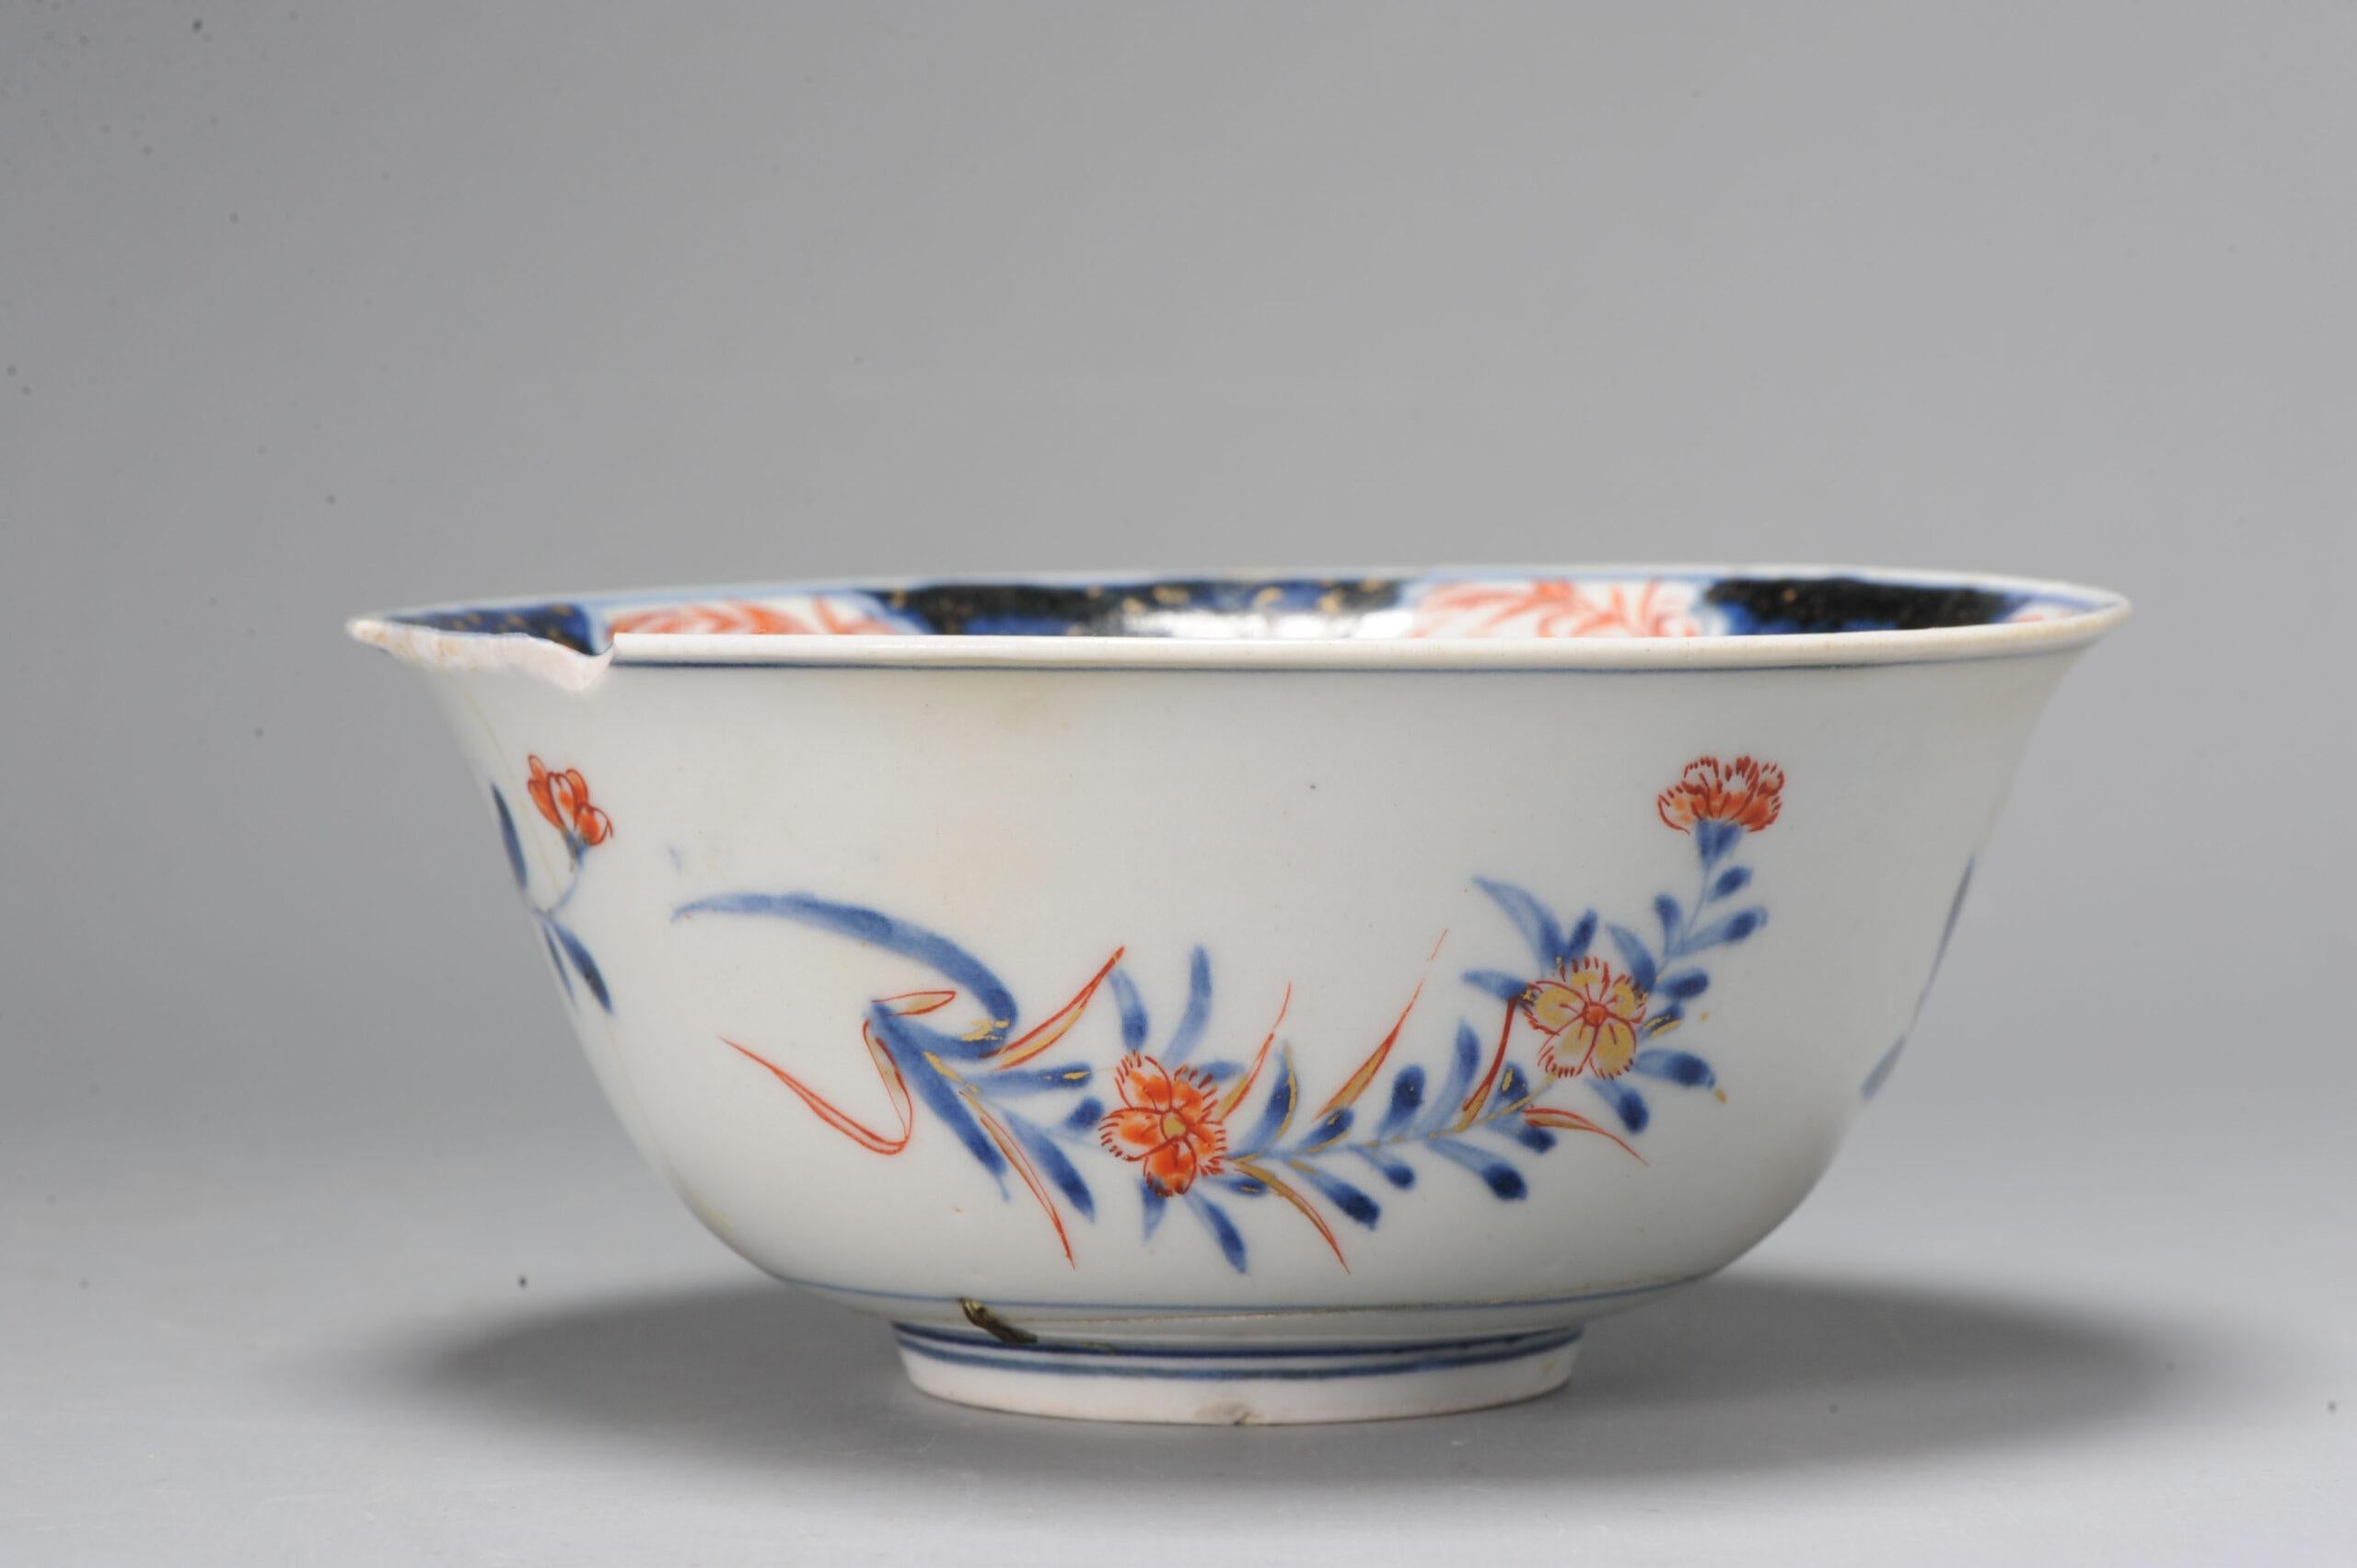 A nice and beautiful bowl, restored with crams.

Additional information:
Material: Porcelain & Pottery
Type: Bowls
Region of Origin: Japan
Period: 17th century
Age: 17/18th Century
Original/Reproduction: Original
Condition: Restored with crams,